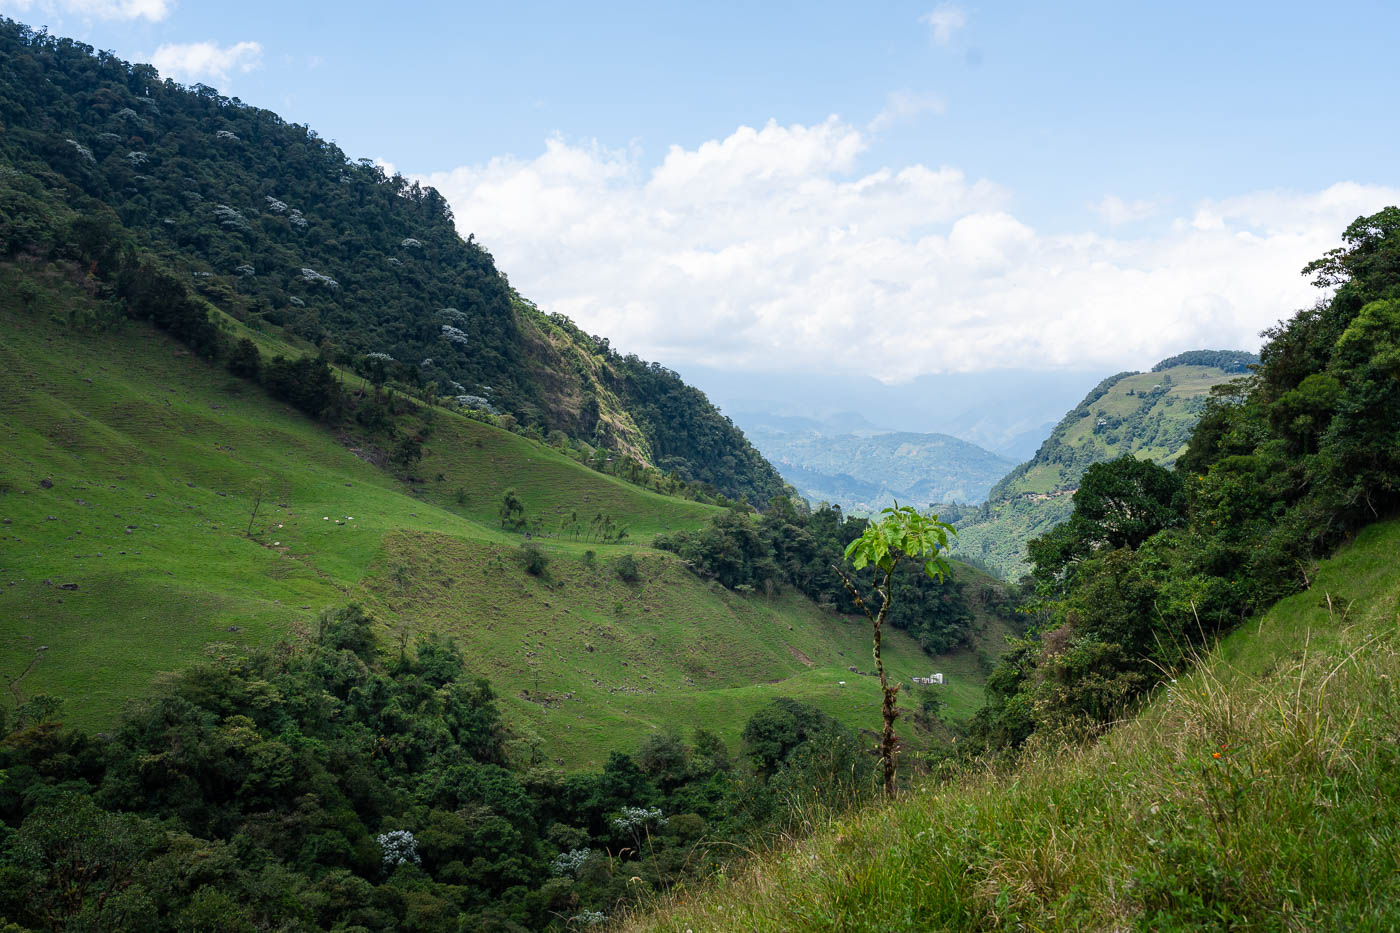 A view across a valley in the Andes from the trail up to the Fall of the Dragon waterfall.